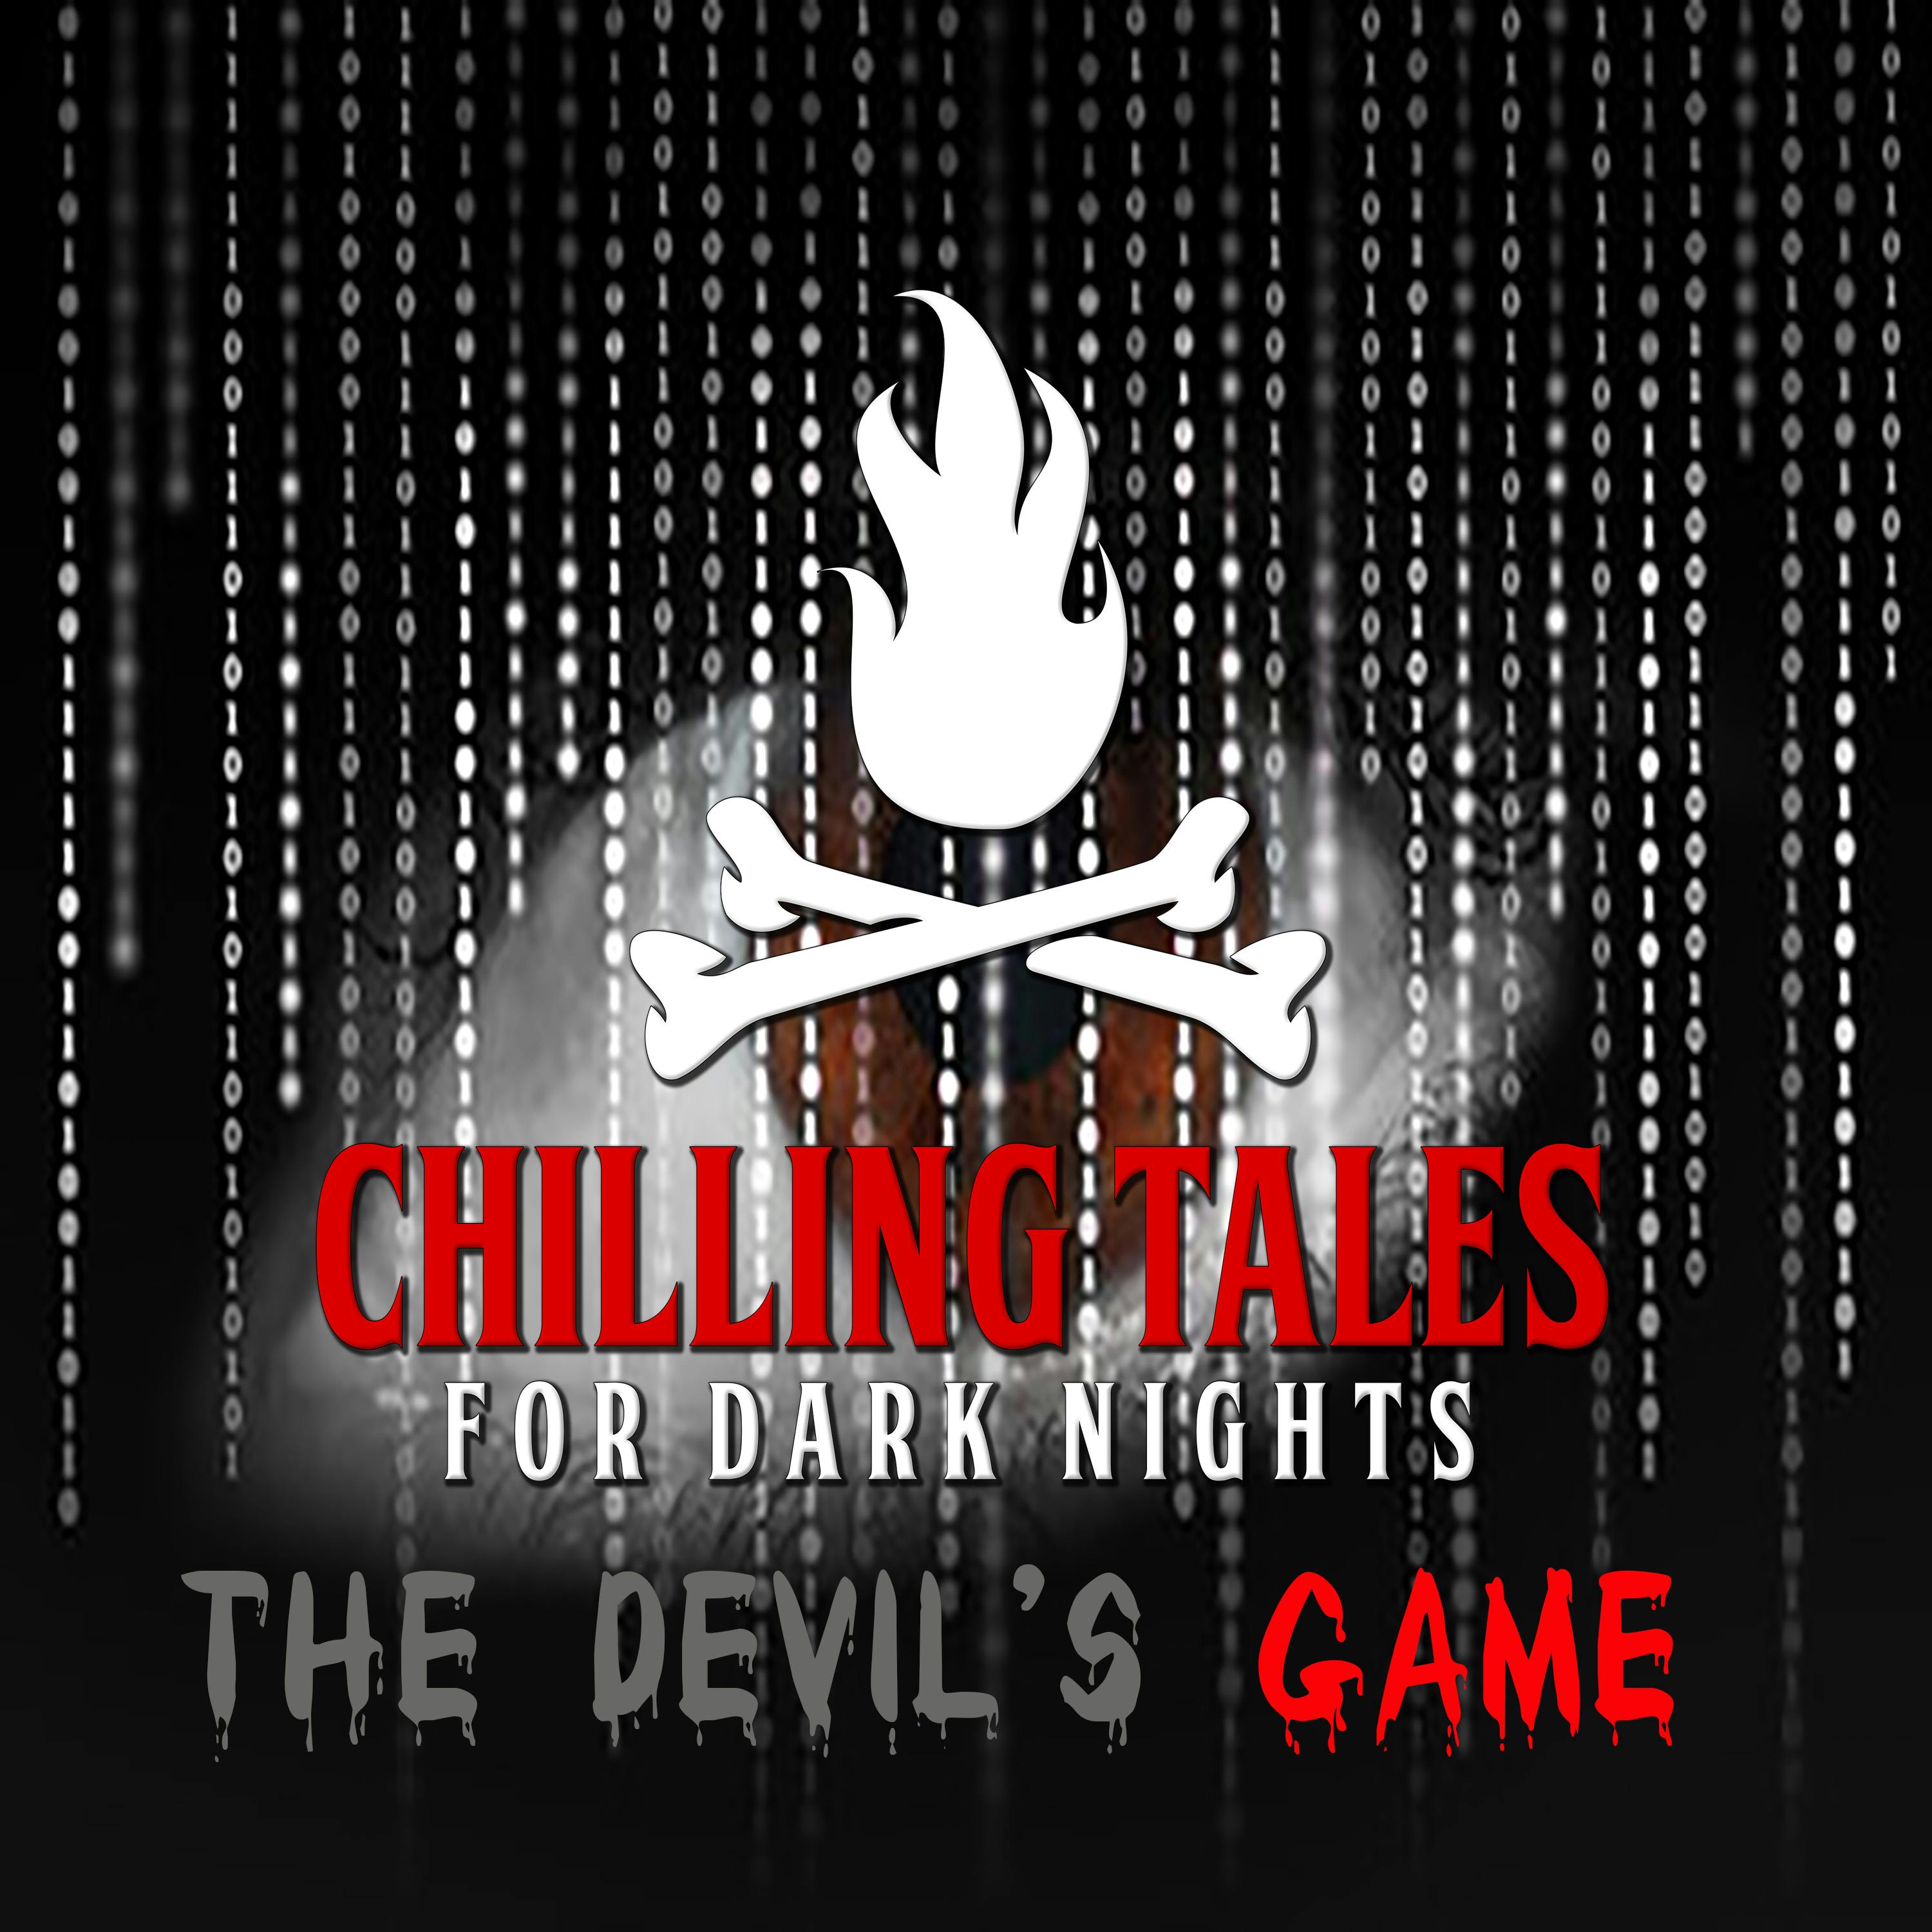 171: The Devil’s Game - Chilling Tales for Dark Nights